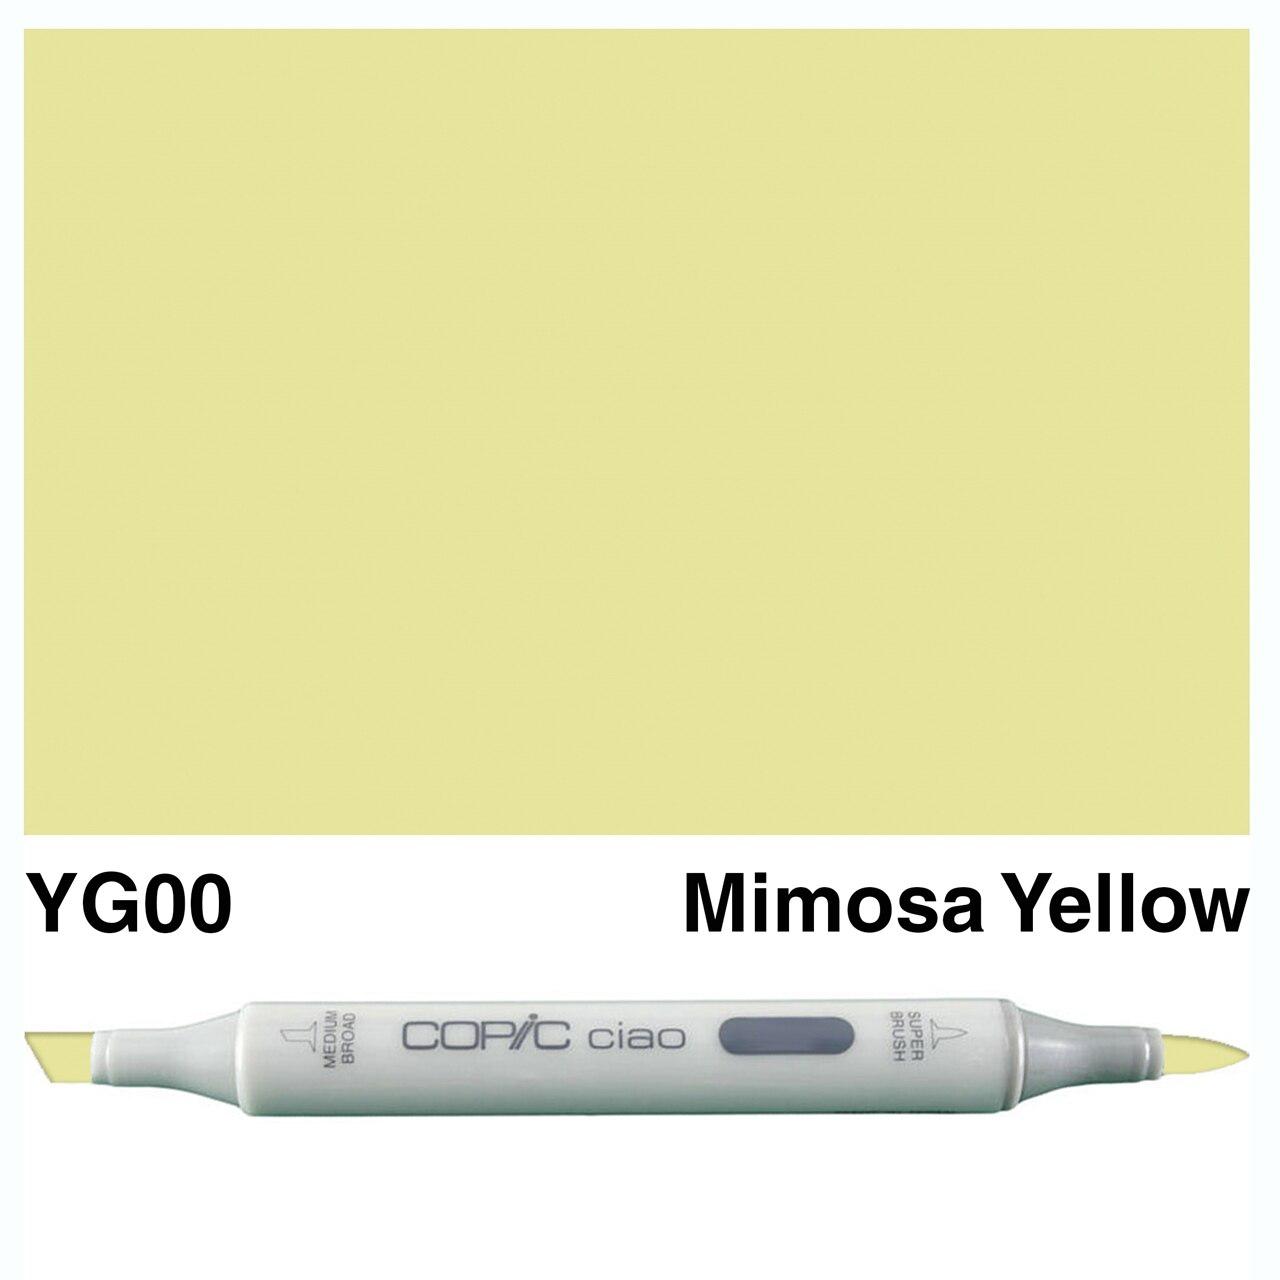 Copic - Ciao Marker - Mimosa Yellow - YG00-ScrapbookPal